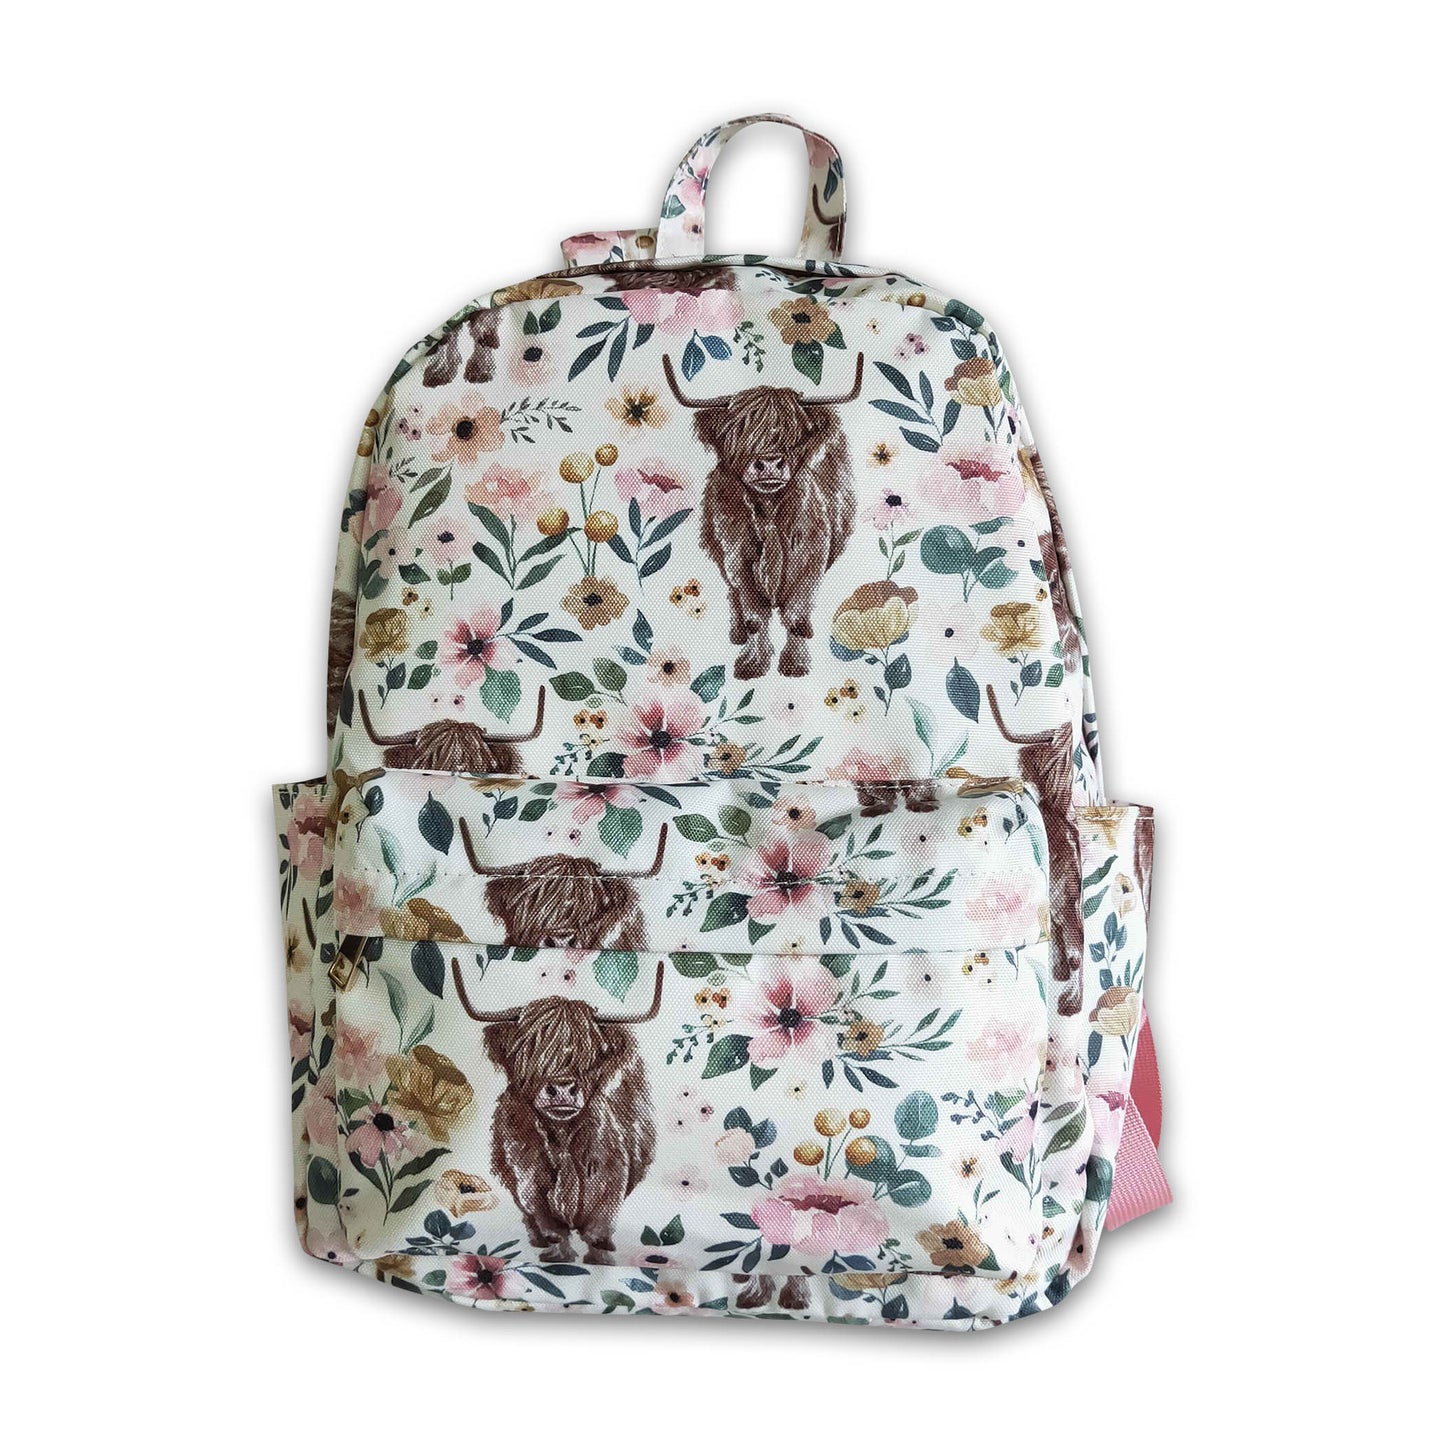 Highland cow kids girls back to school bags